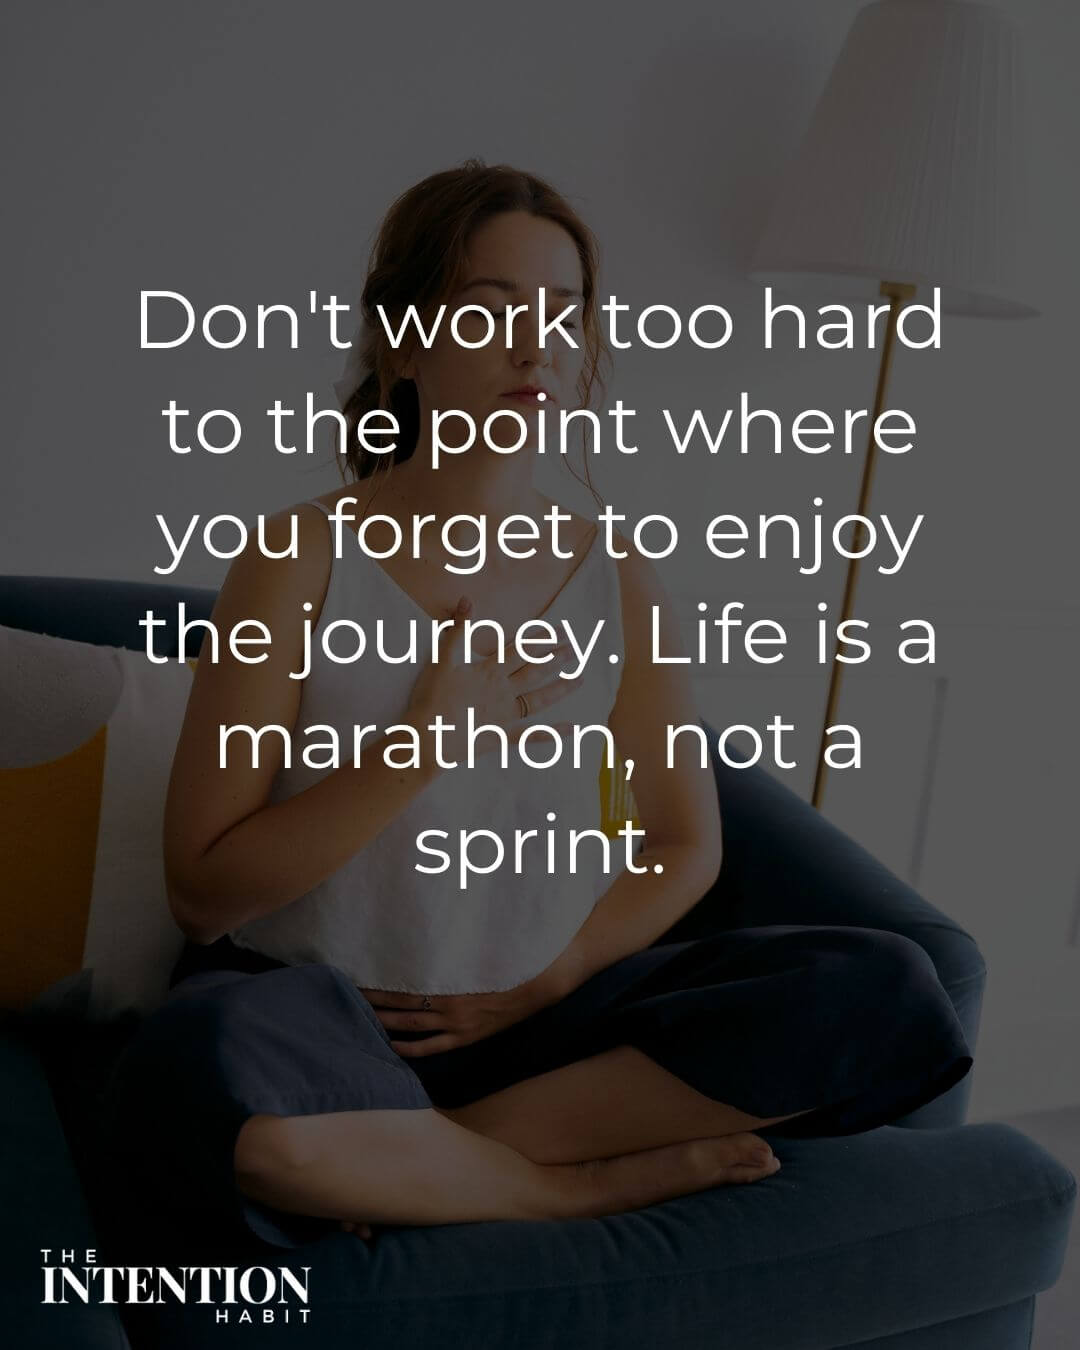 Intentional living quote - don't work too hard to the point where you forget to enjoy the journey. Life is a marathon not a sprint